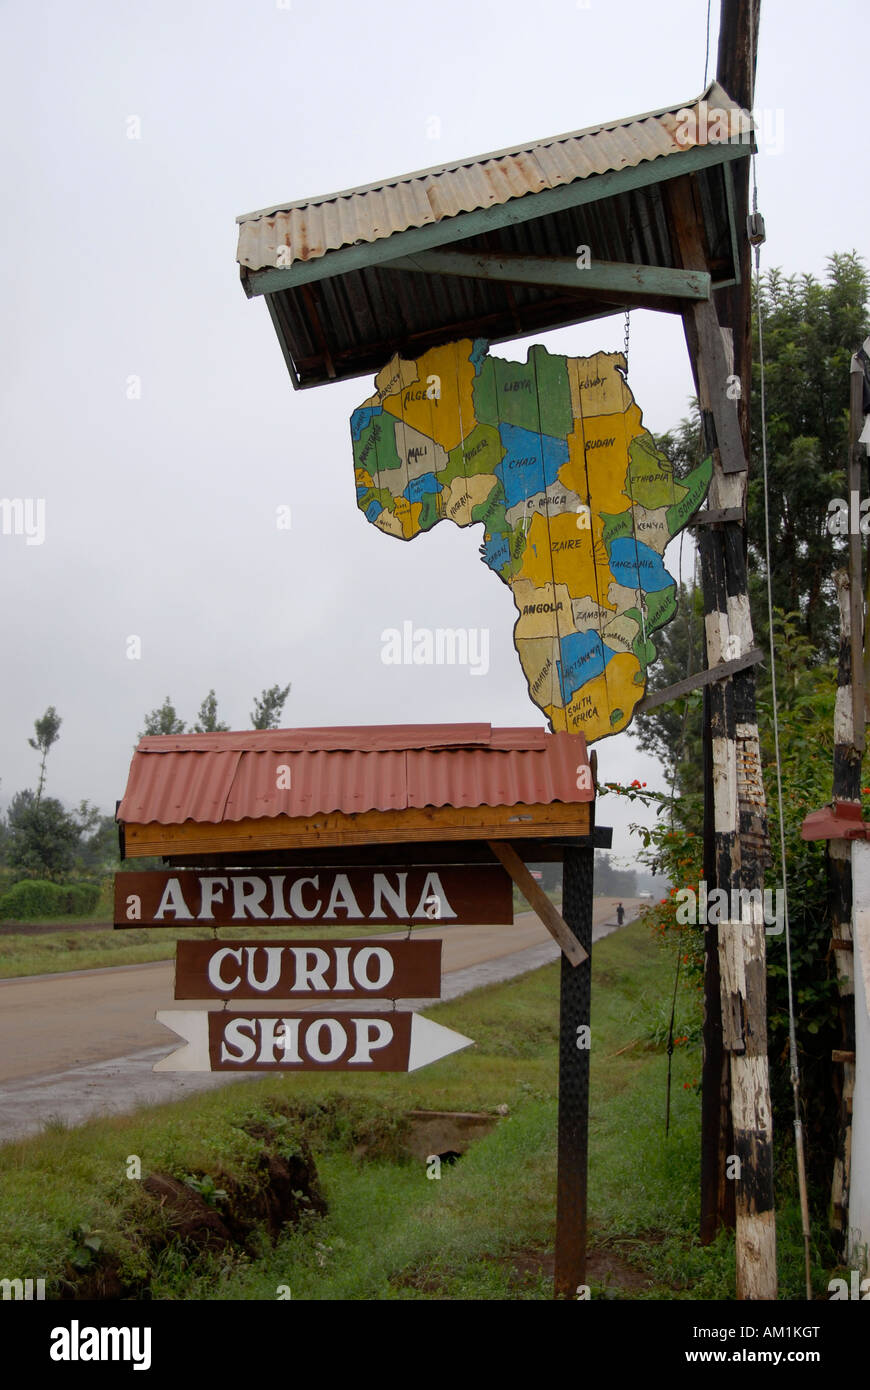 Sign Africana Curio Shop with map of Africa noth of Nairobi Kenya Stock Photo